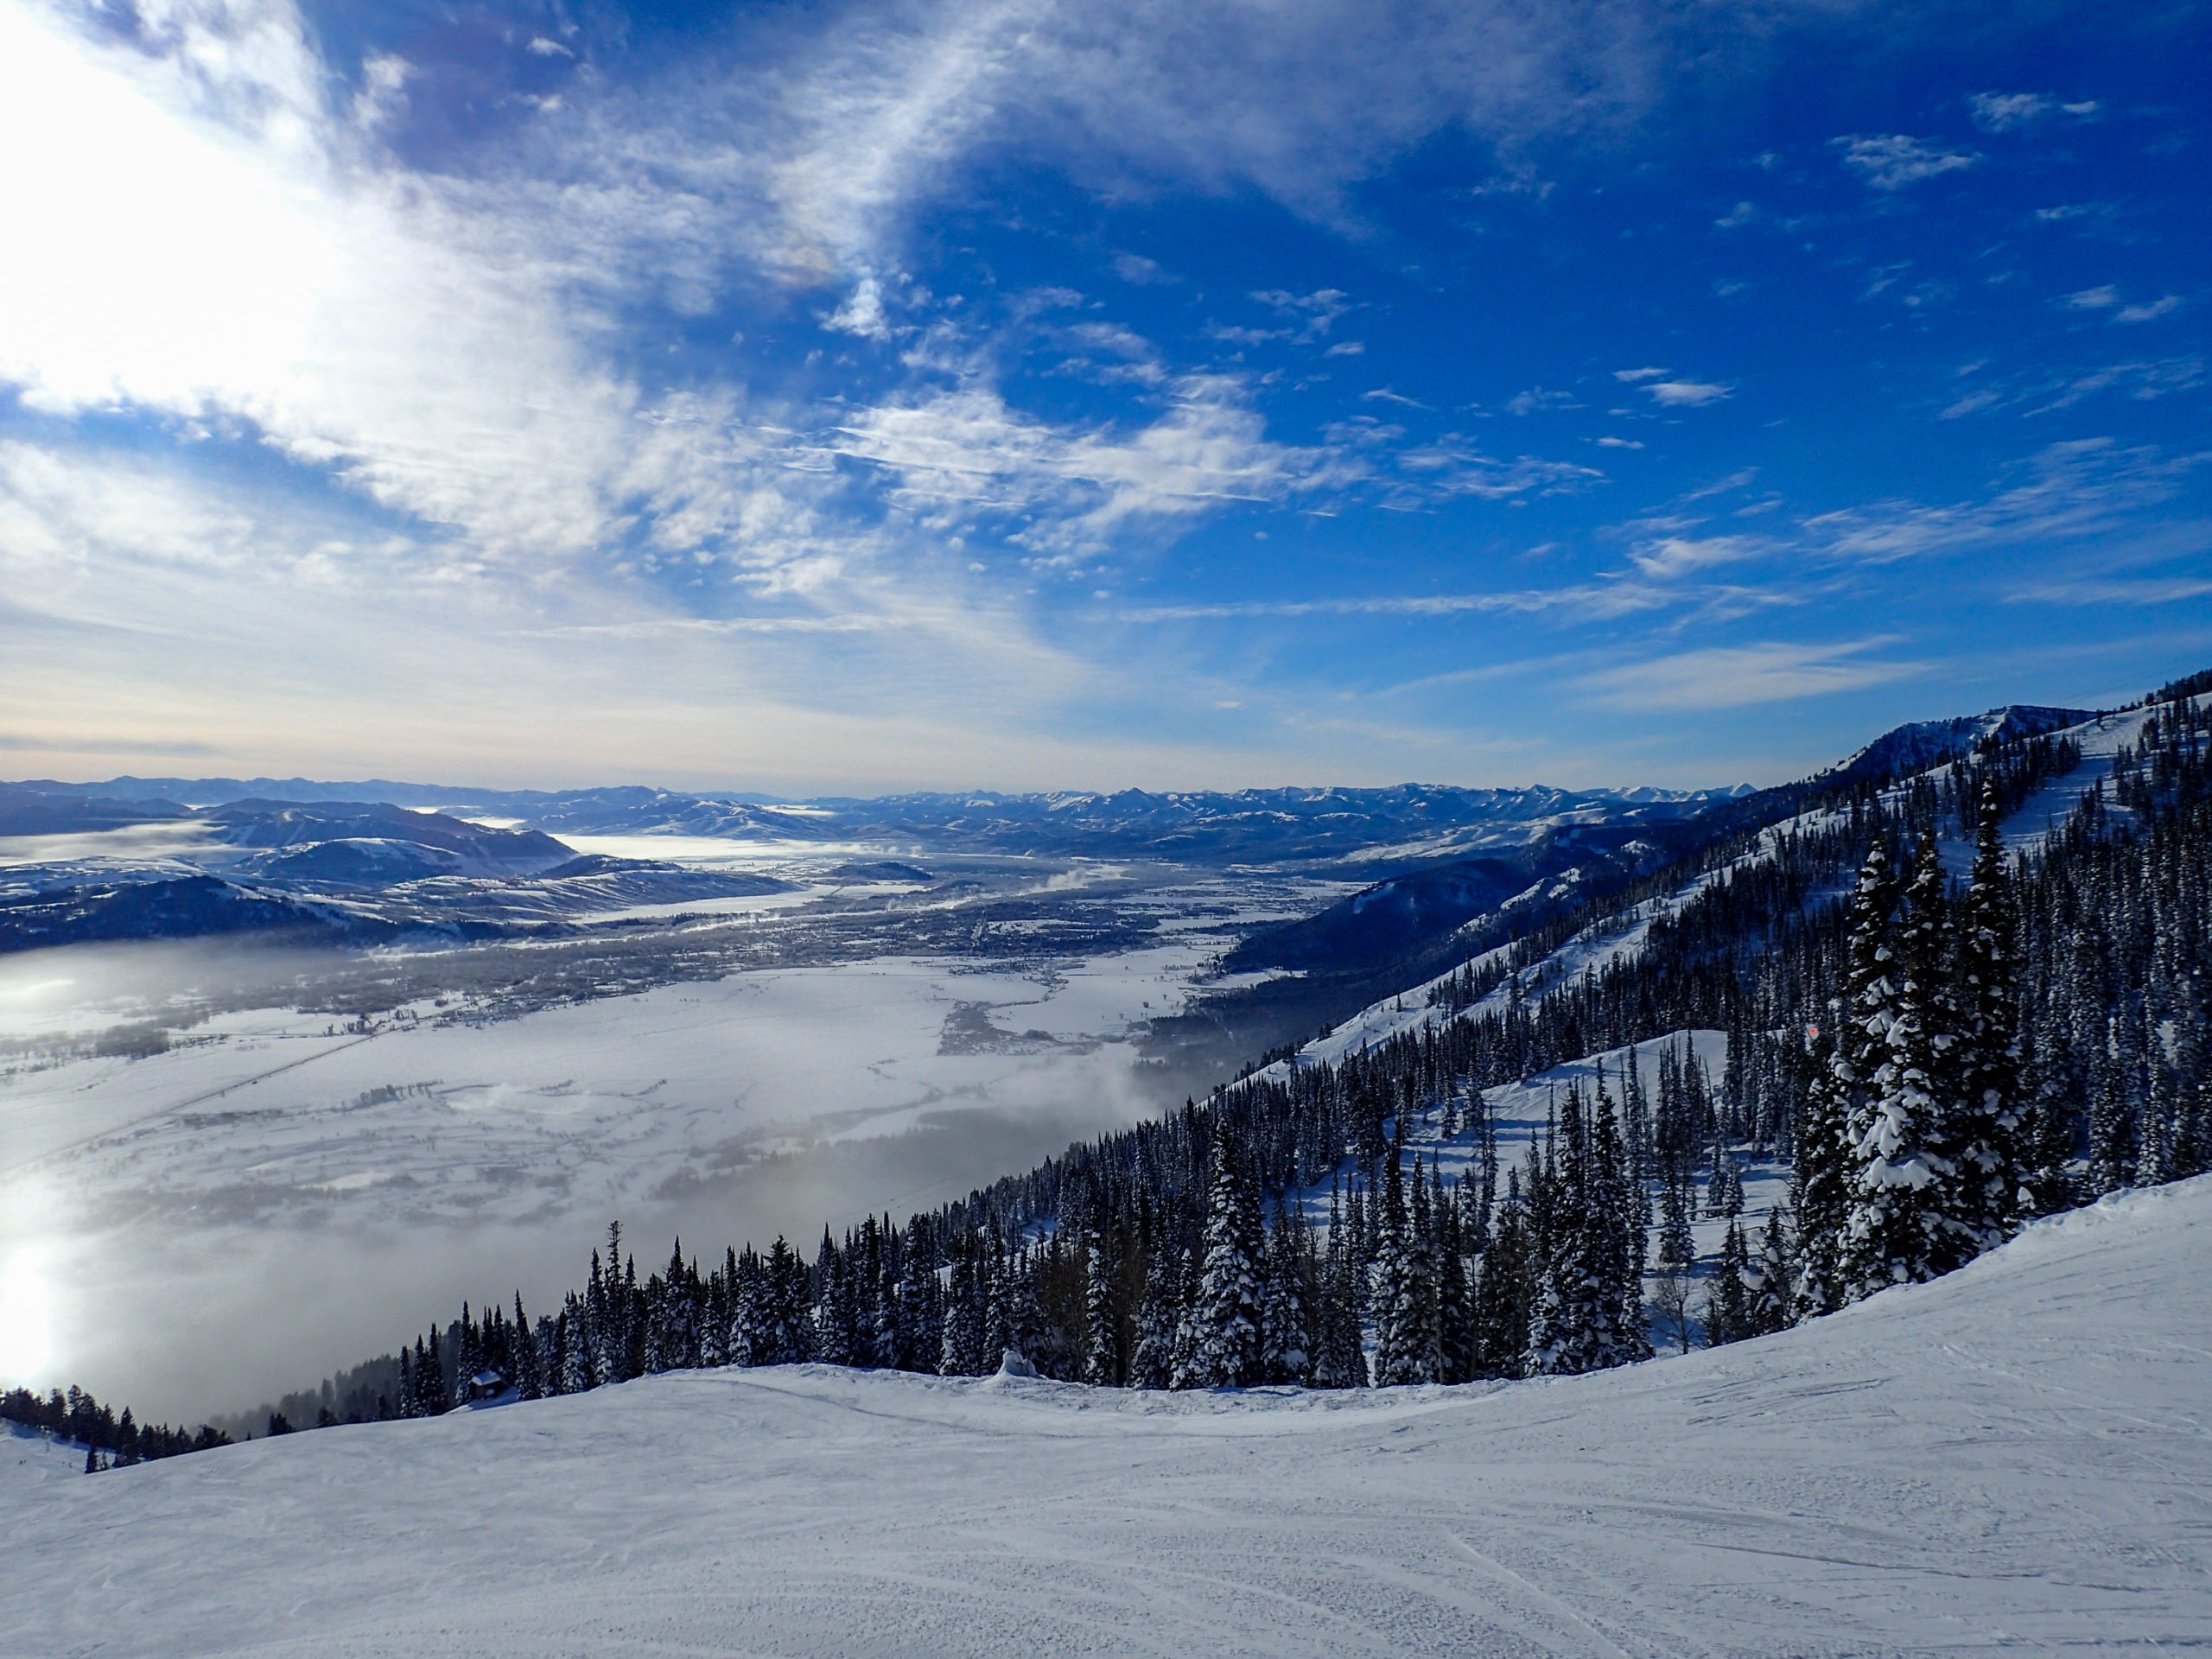 Skiing Jackson Hole Should Top Your New Year’s Resolution List